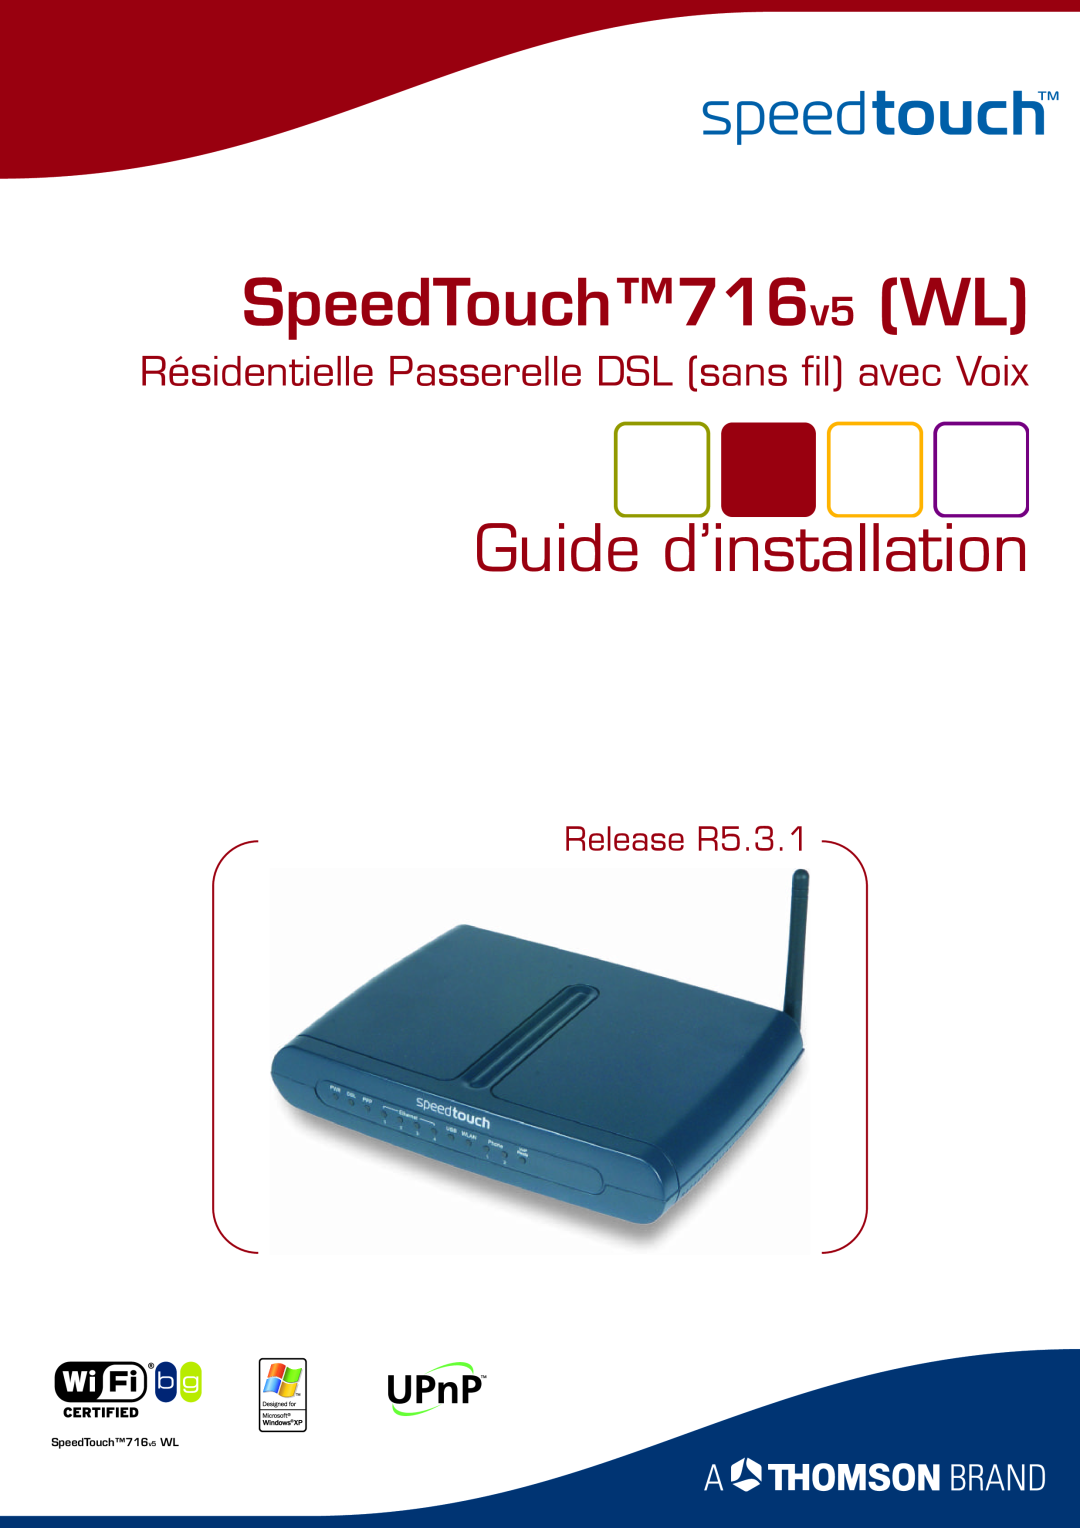 Technicolor - Thomson 716V5 (WL) manual SpeedTouch716v5 WL, Guide d’installation, Release R5.3.1 